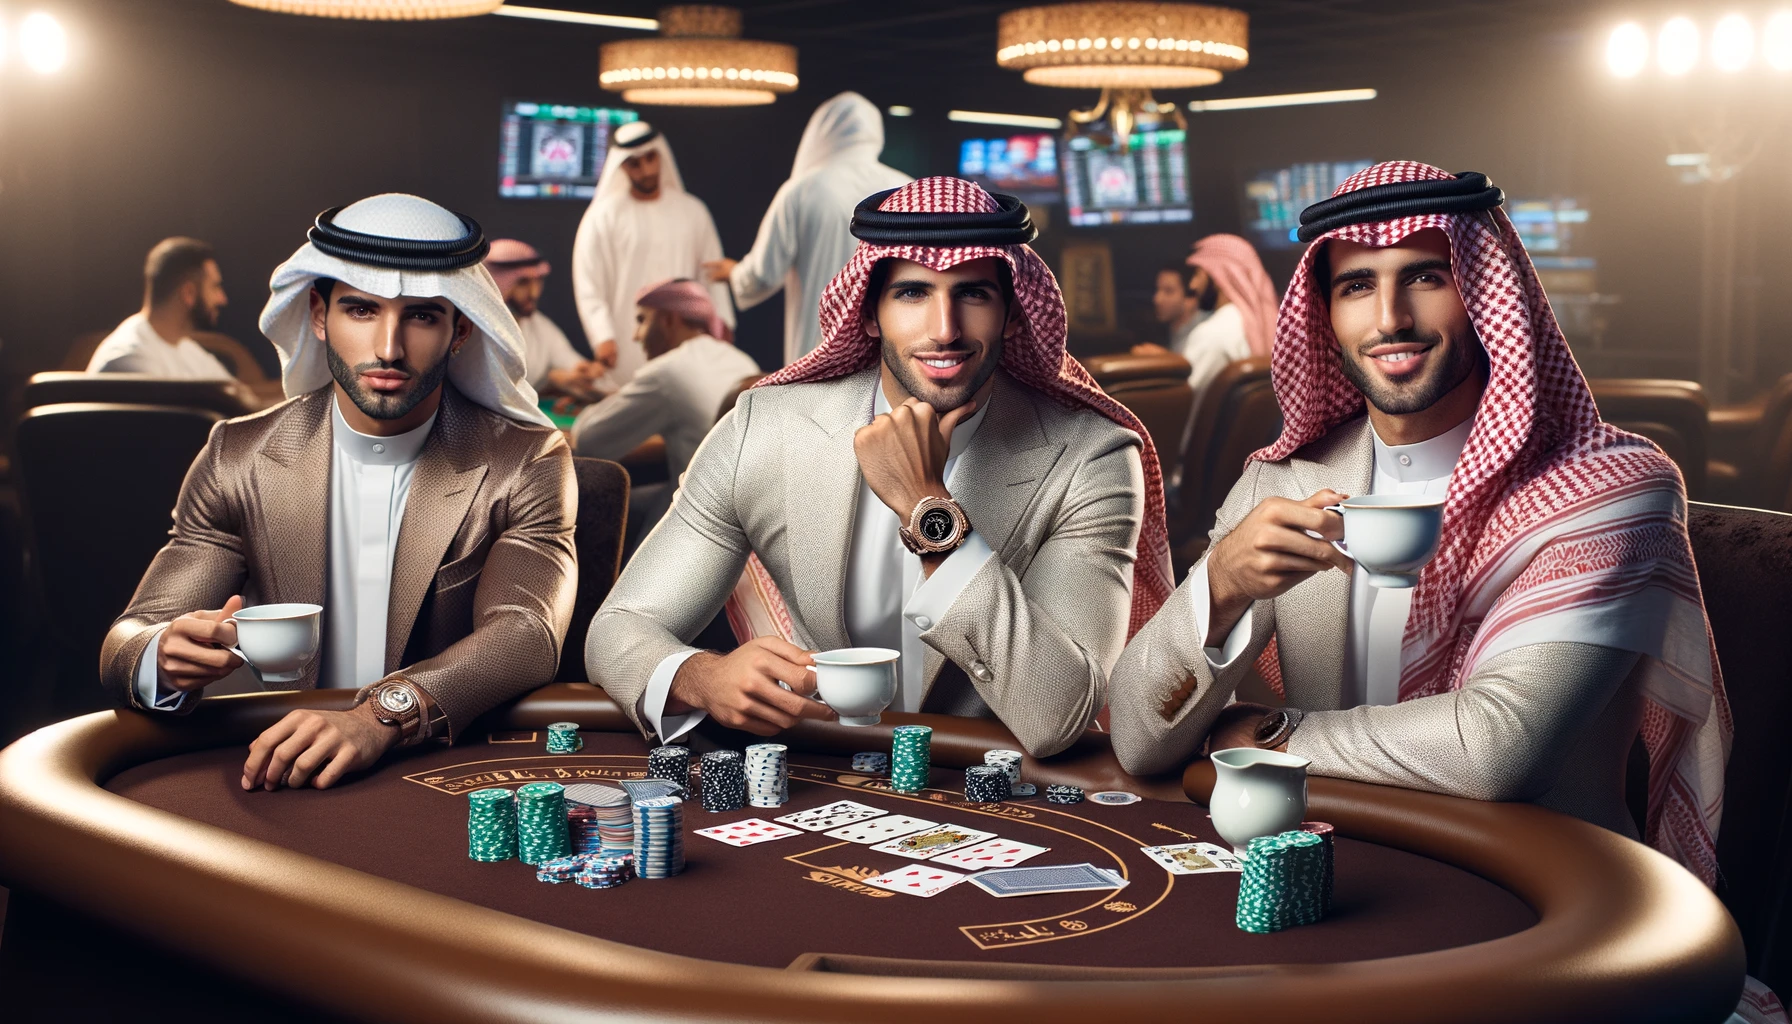 At a card table sit 3 handsome Arab men in expensive Arab suits, each with an expensive watch on his right hand, sitting at a poker table in a casino